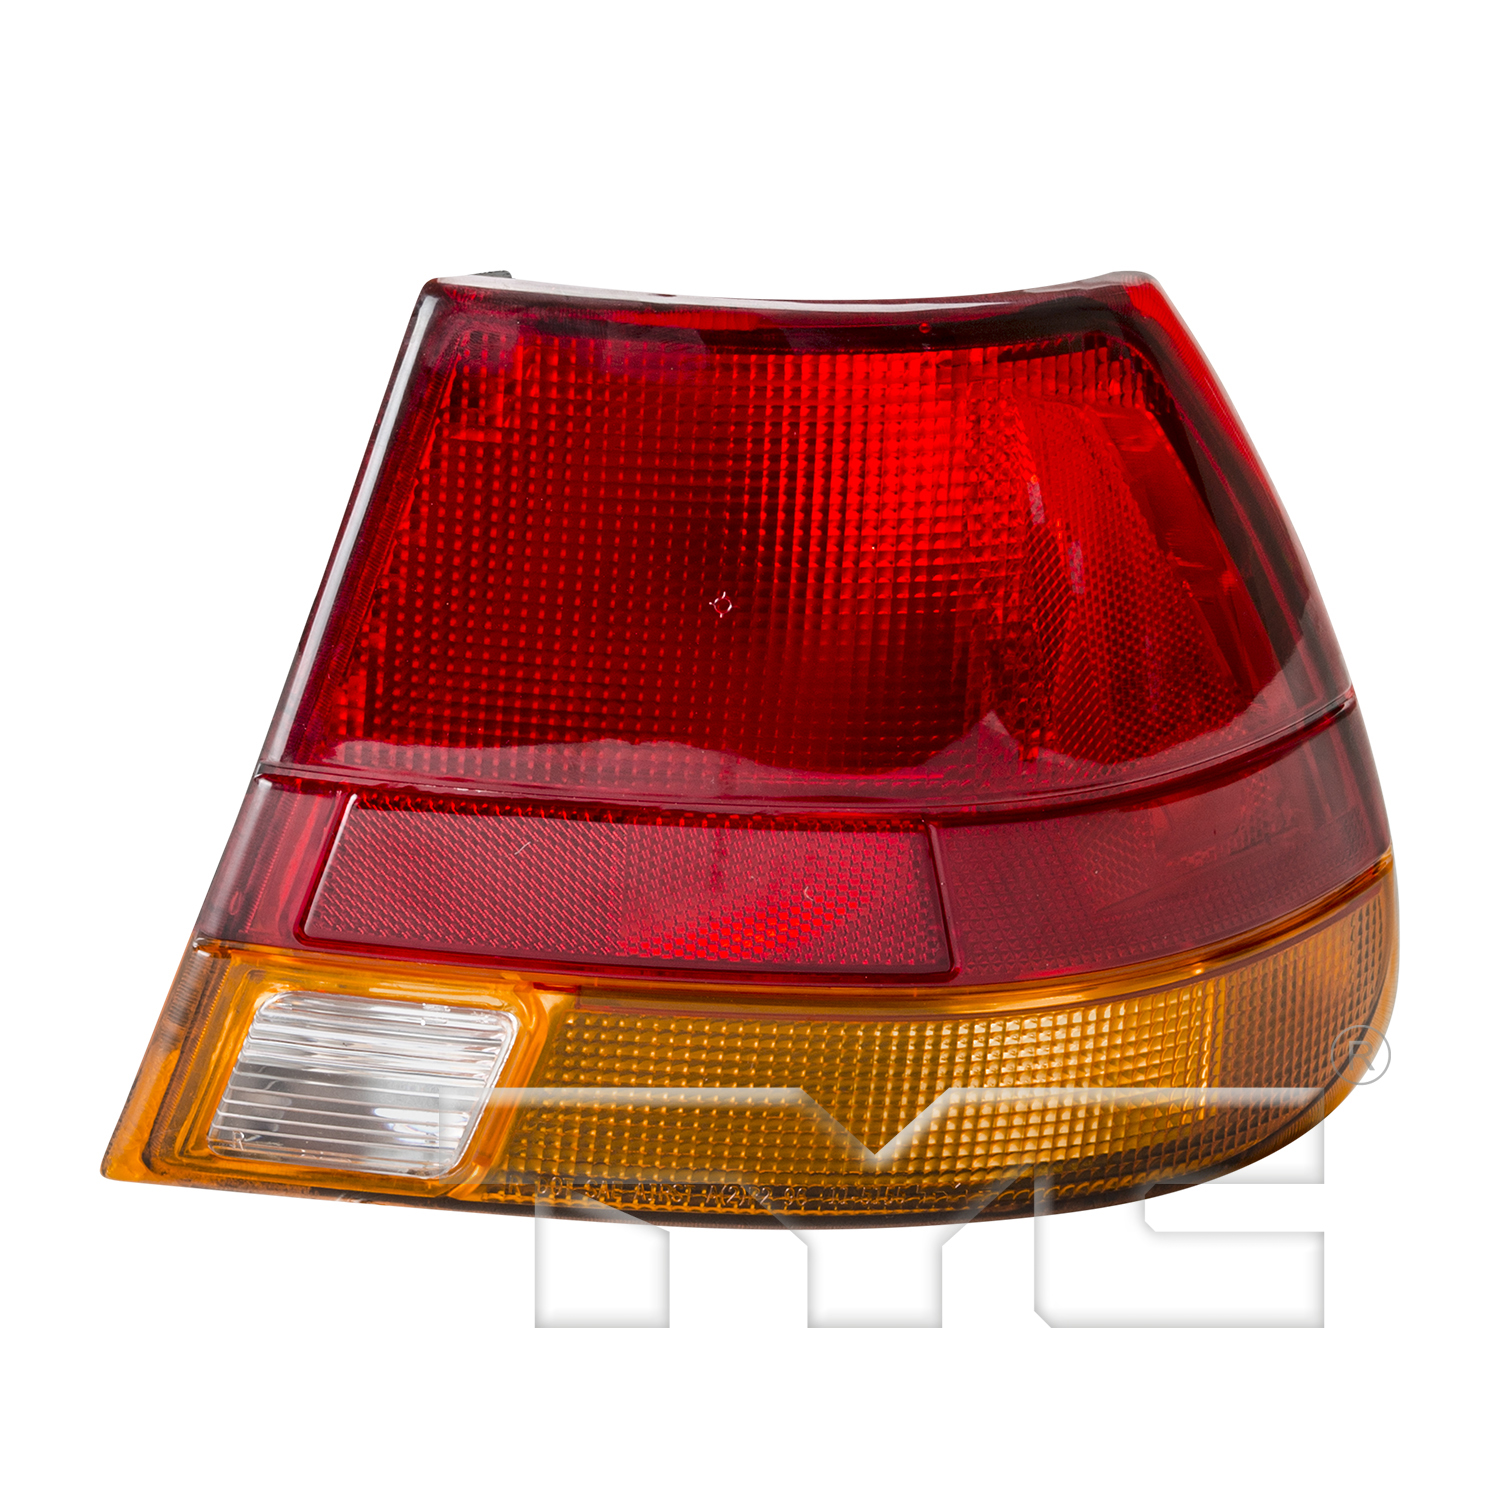 Aftermarket TAILLIGHTS for SATURN - SL, SL,96-97,RT Taillamp lens/housing